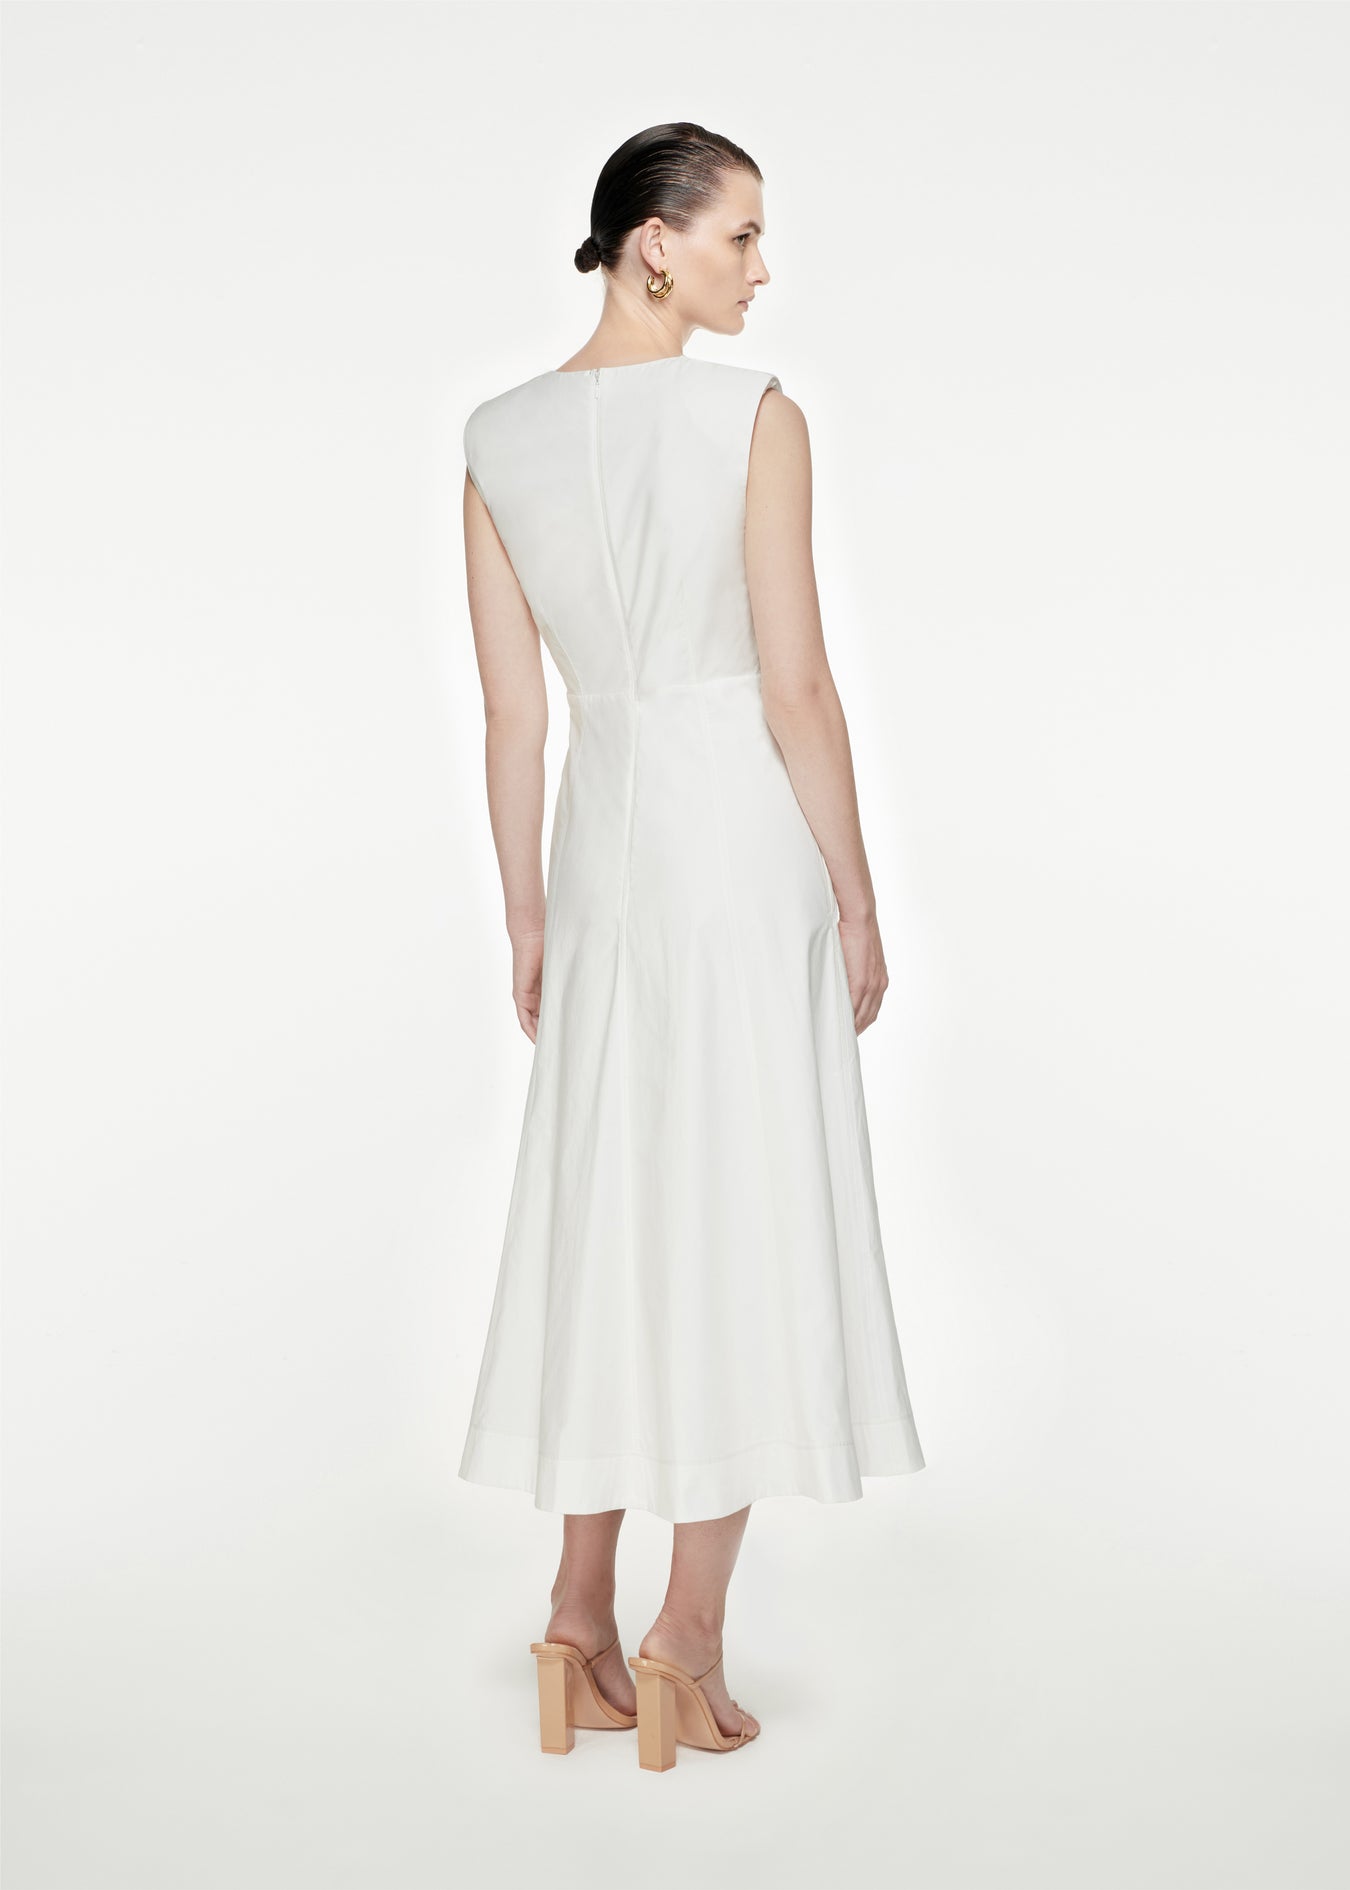 The back of a woman wearing the Cotton Poplin Midi Dress in White